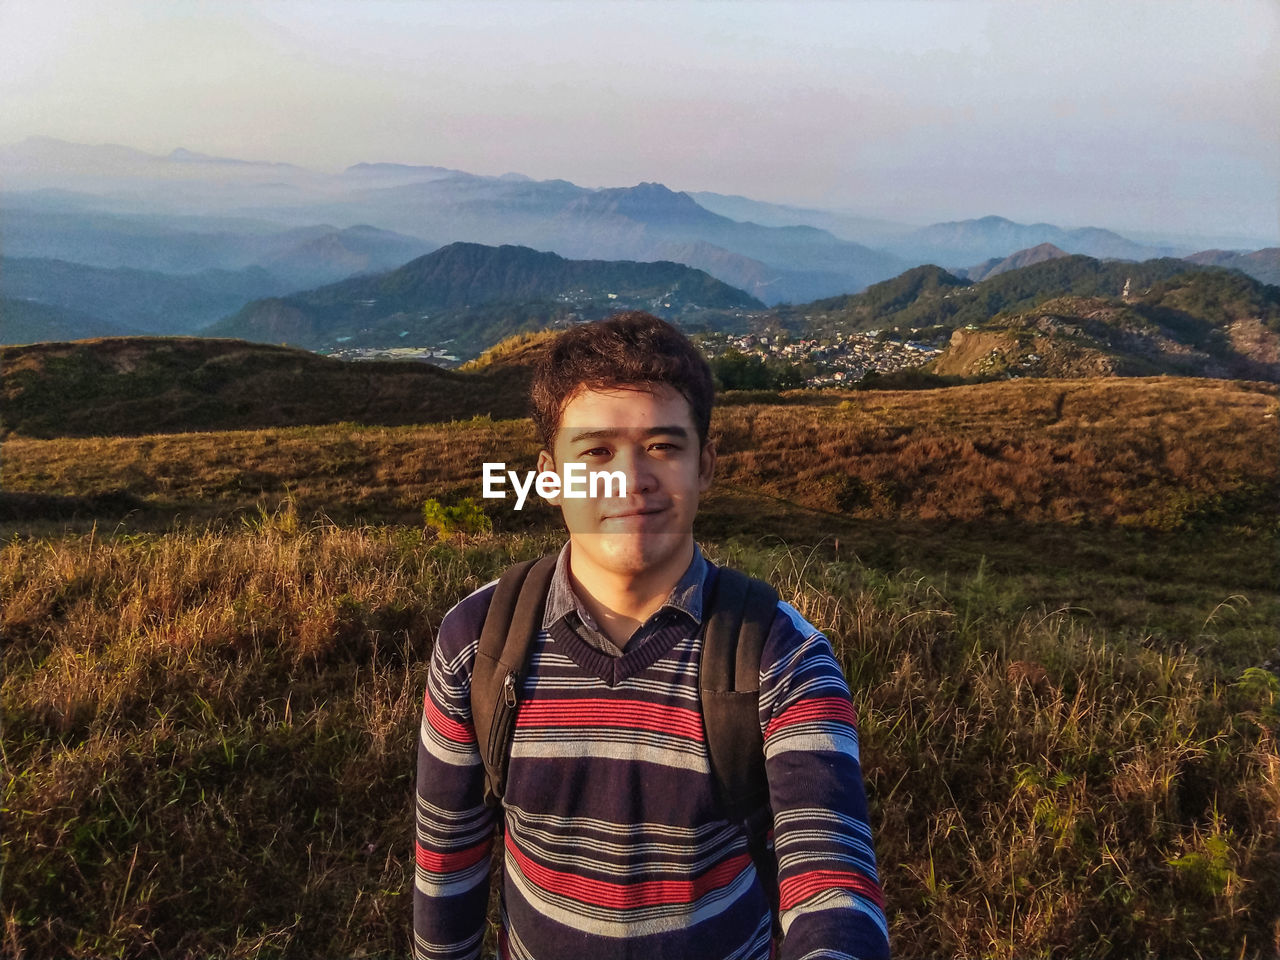 Portrait of young man standing on mountain during sunset